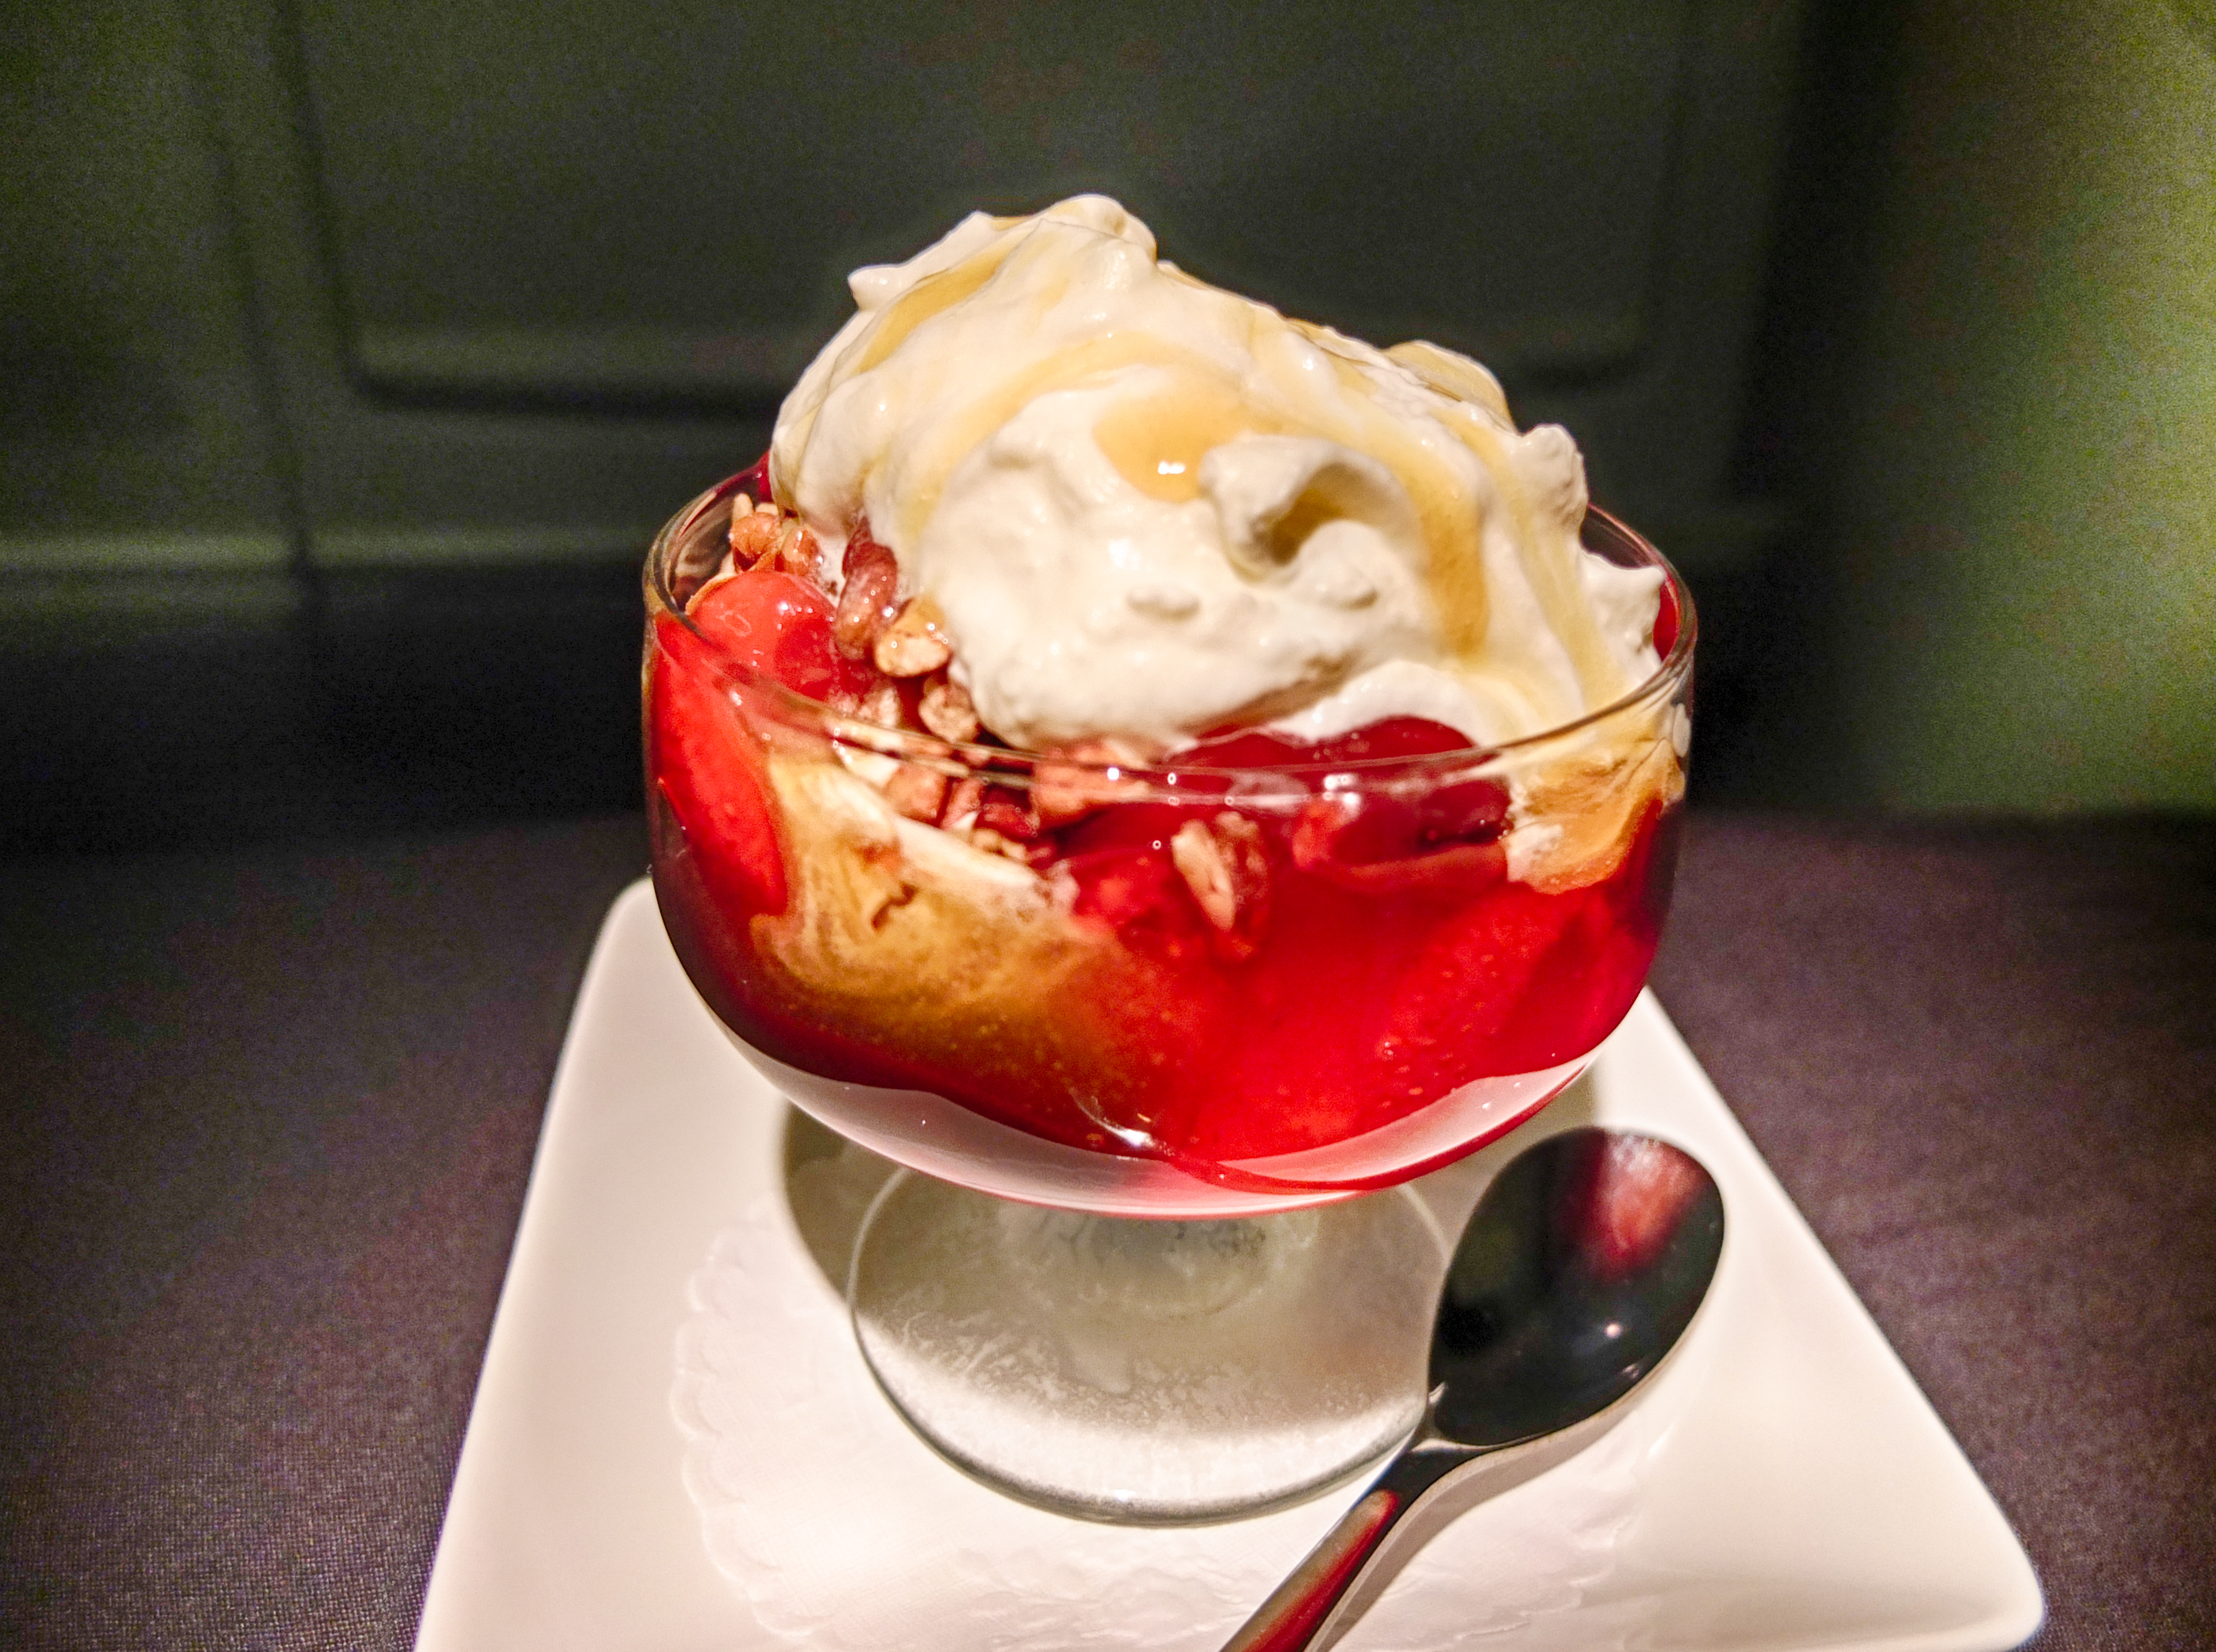 a dessert in a glass with a spoon